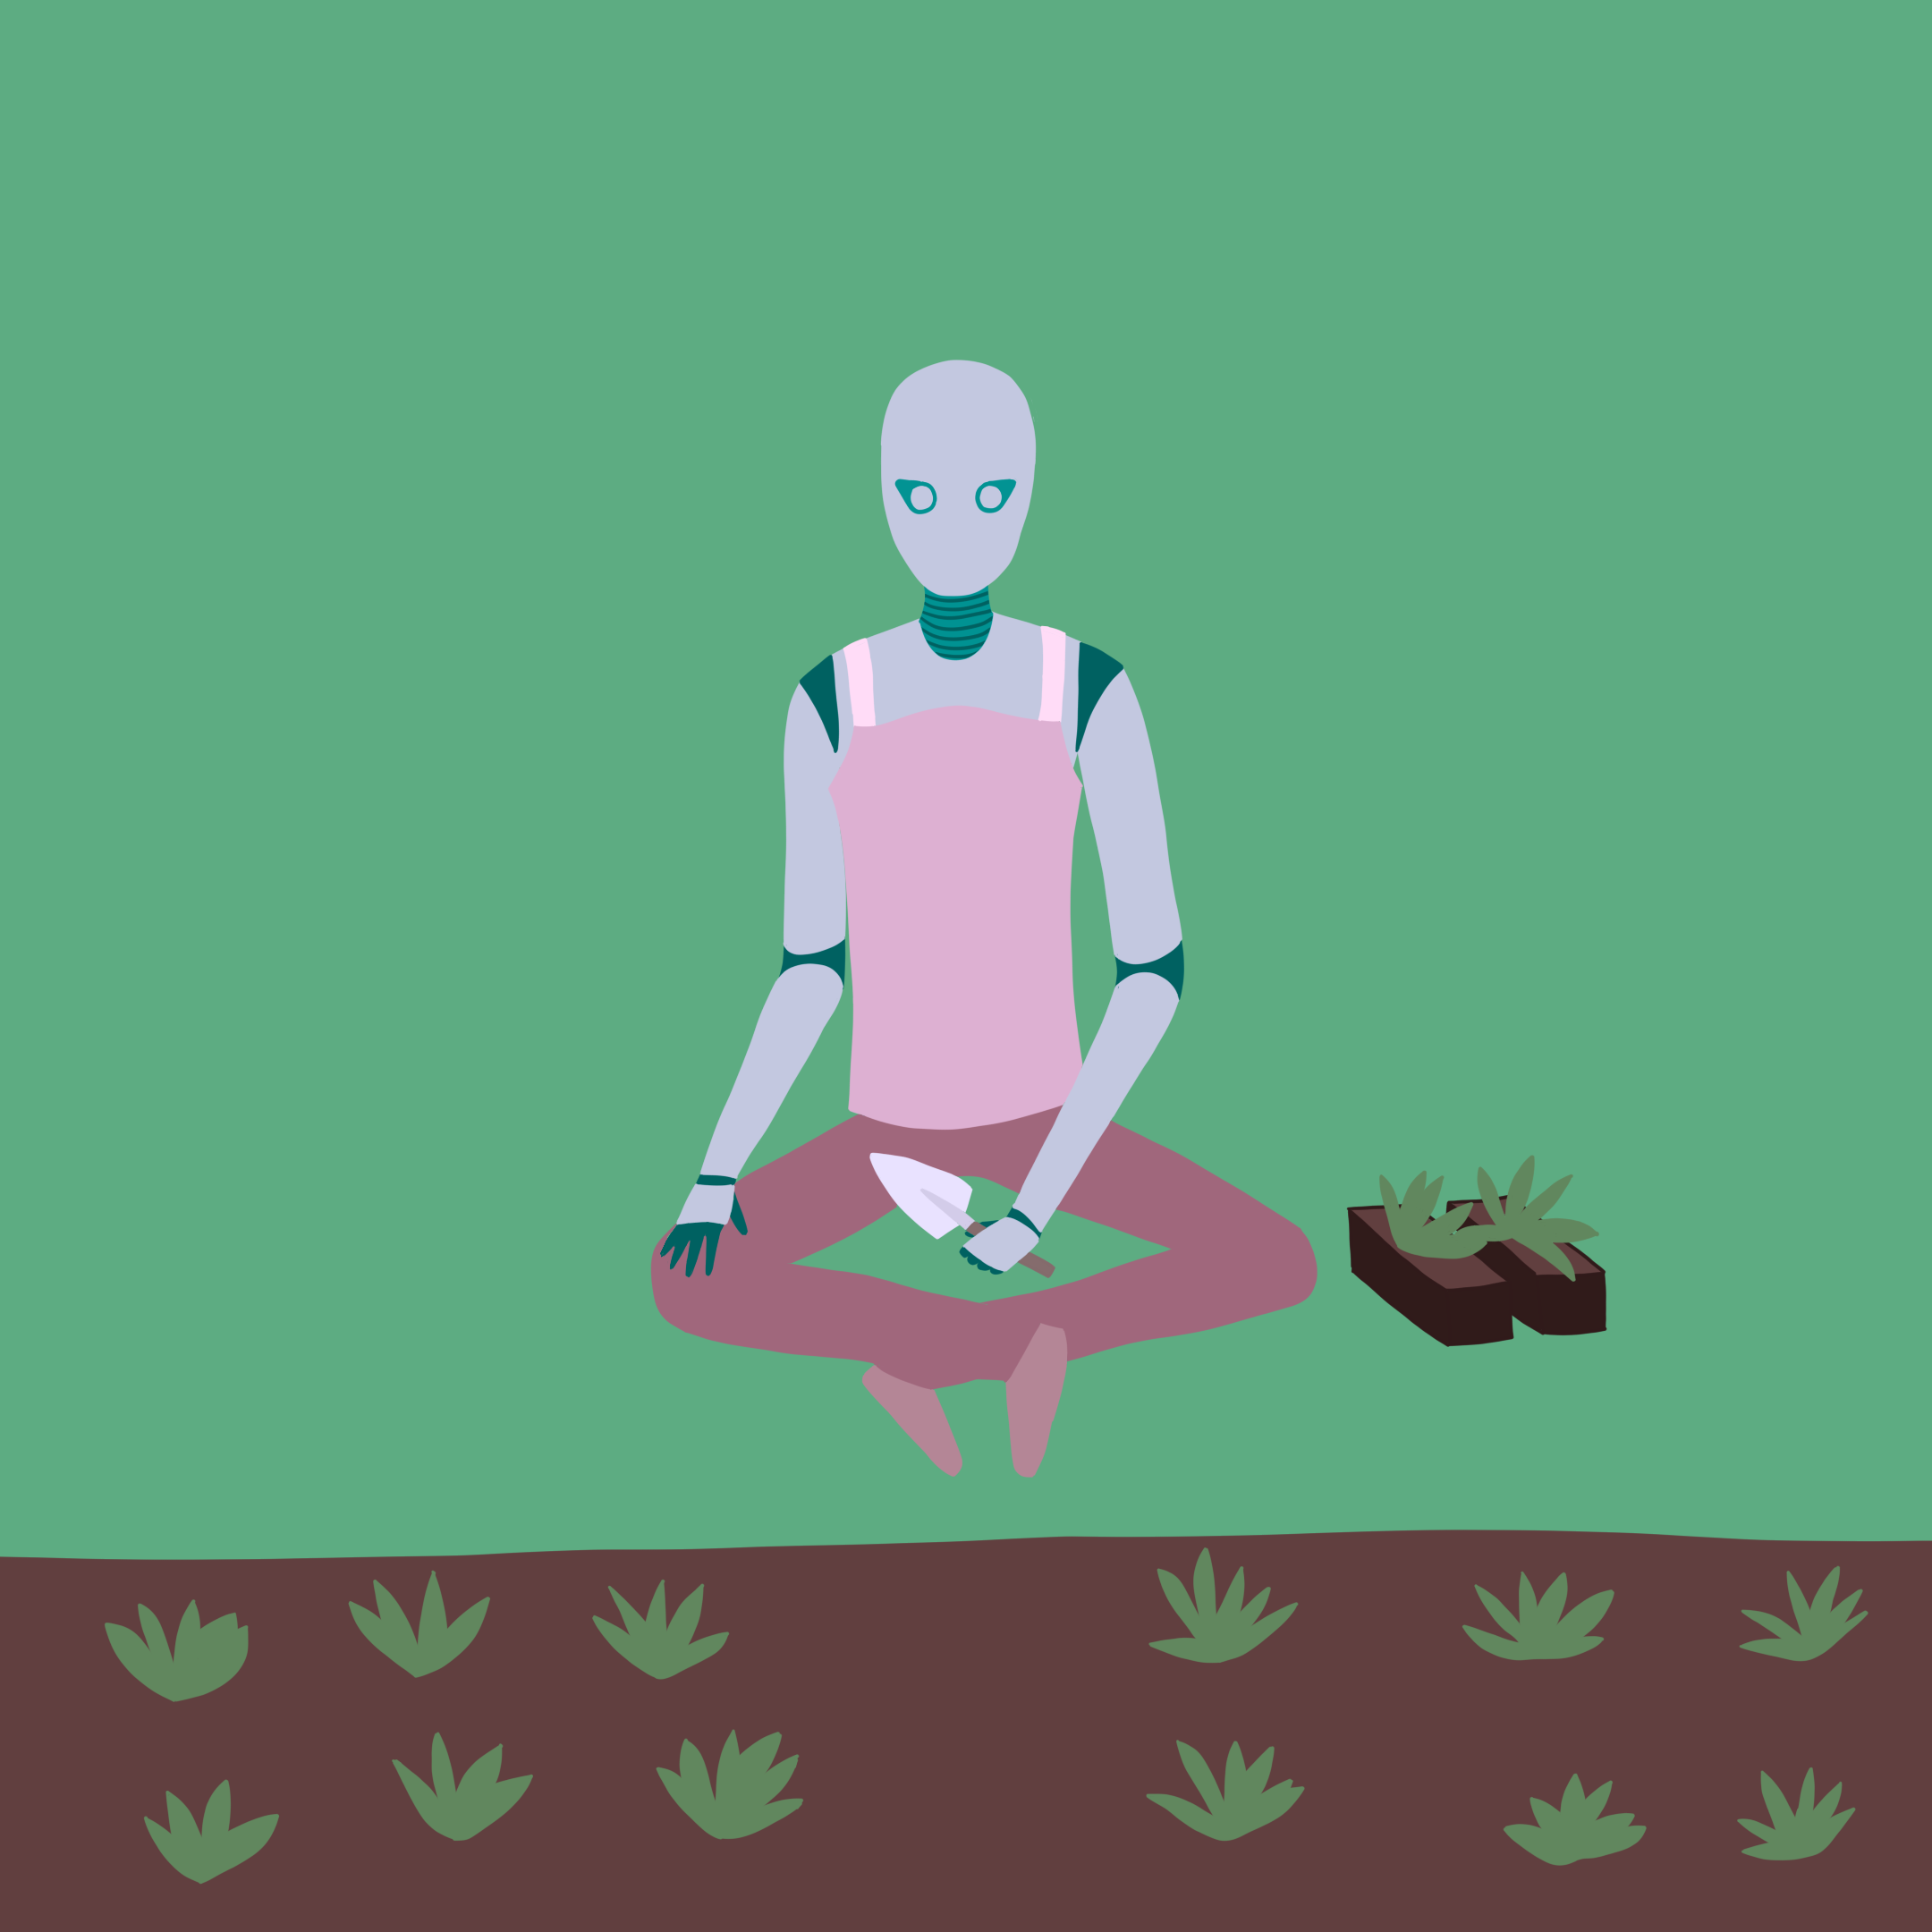 A robot named Rova sitting outside on the grass while planting some plants in a section of dirt.